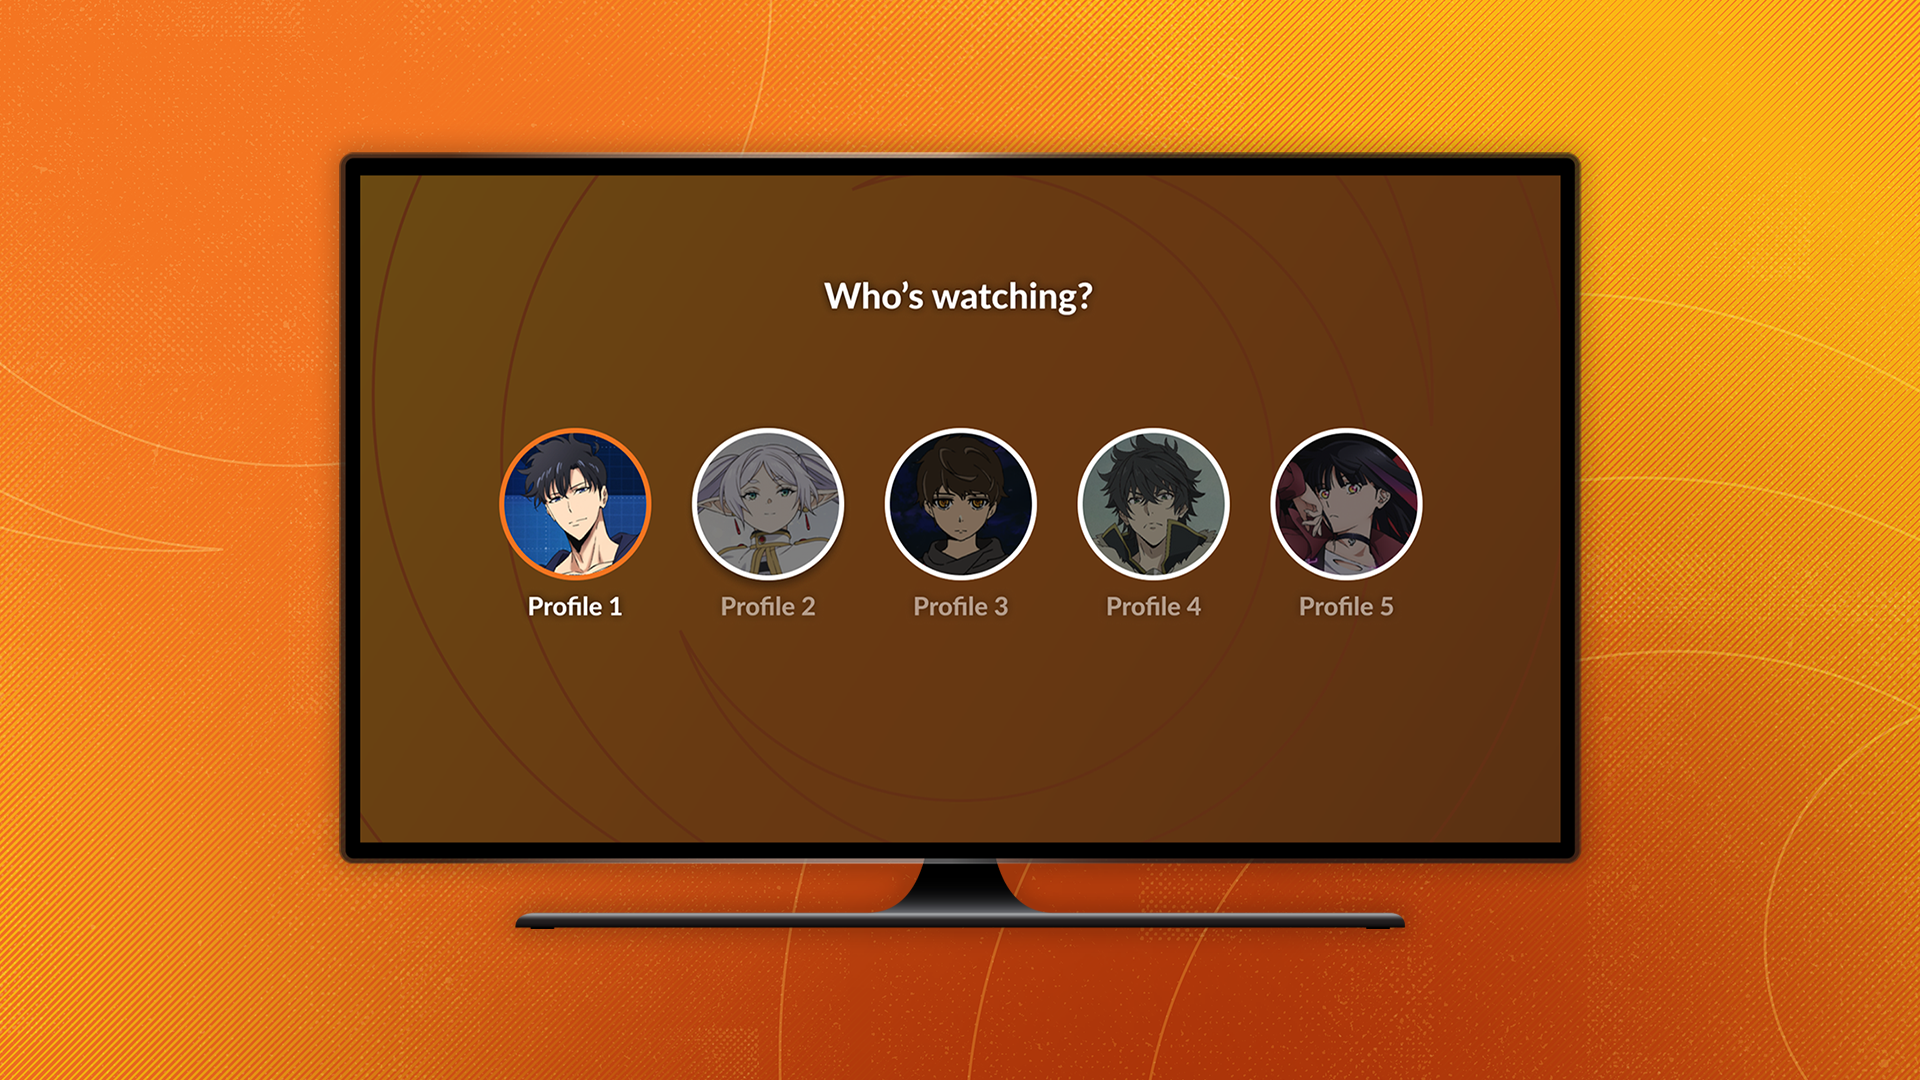 A preview image for Crunchyroll’s profile feature